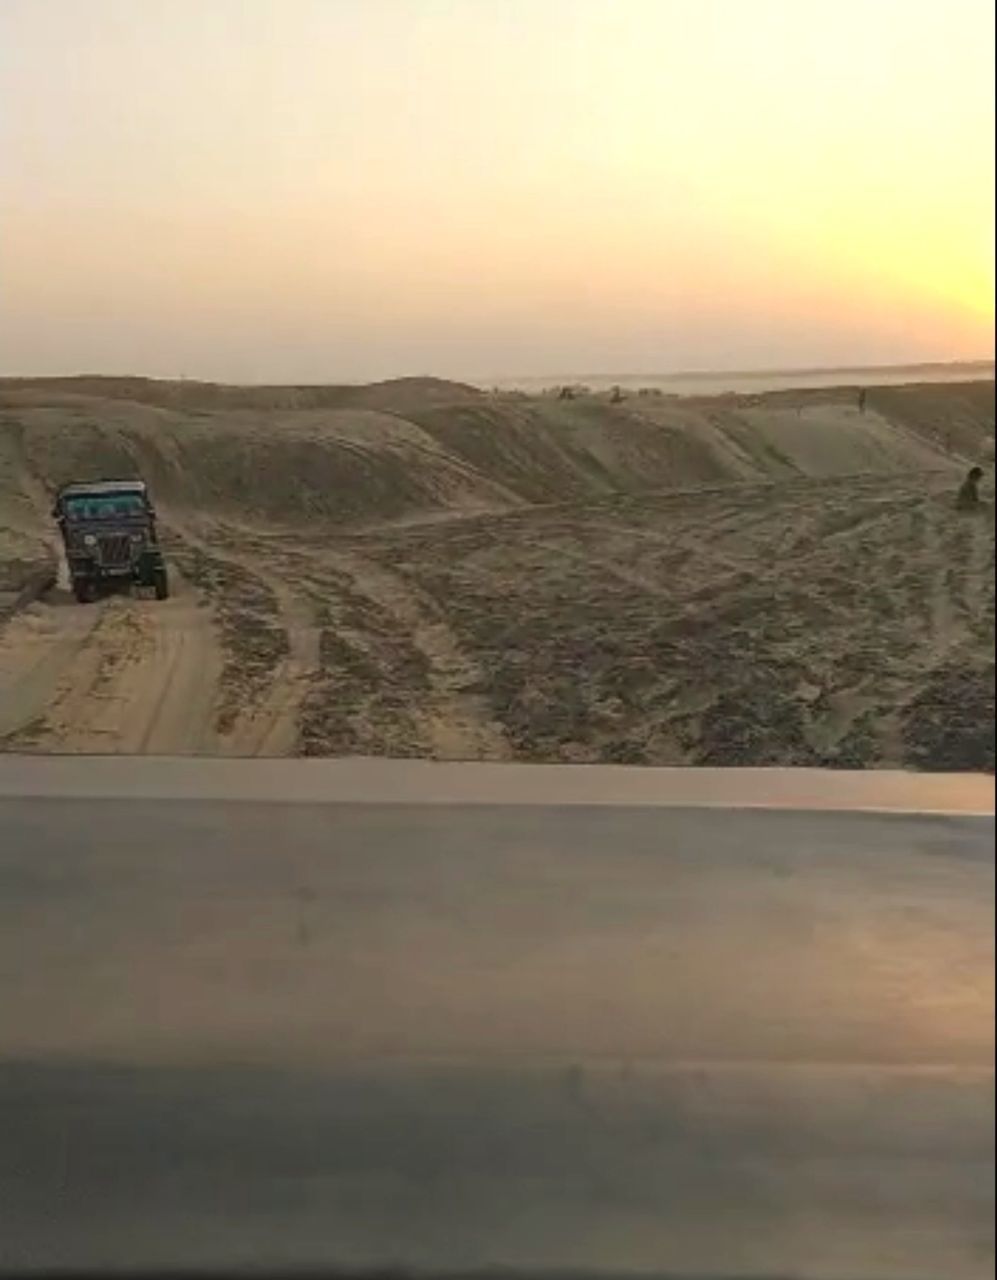 CAR ON ROAD DURING SUNSET